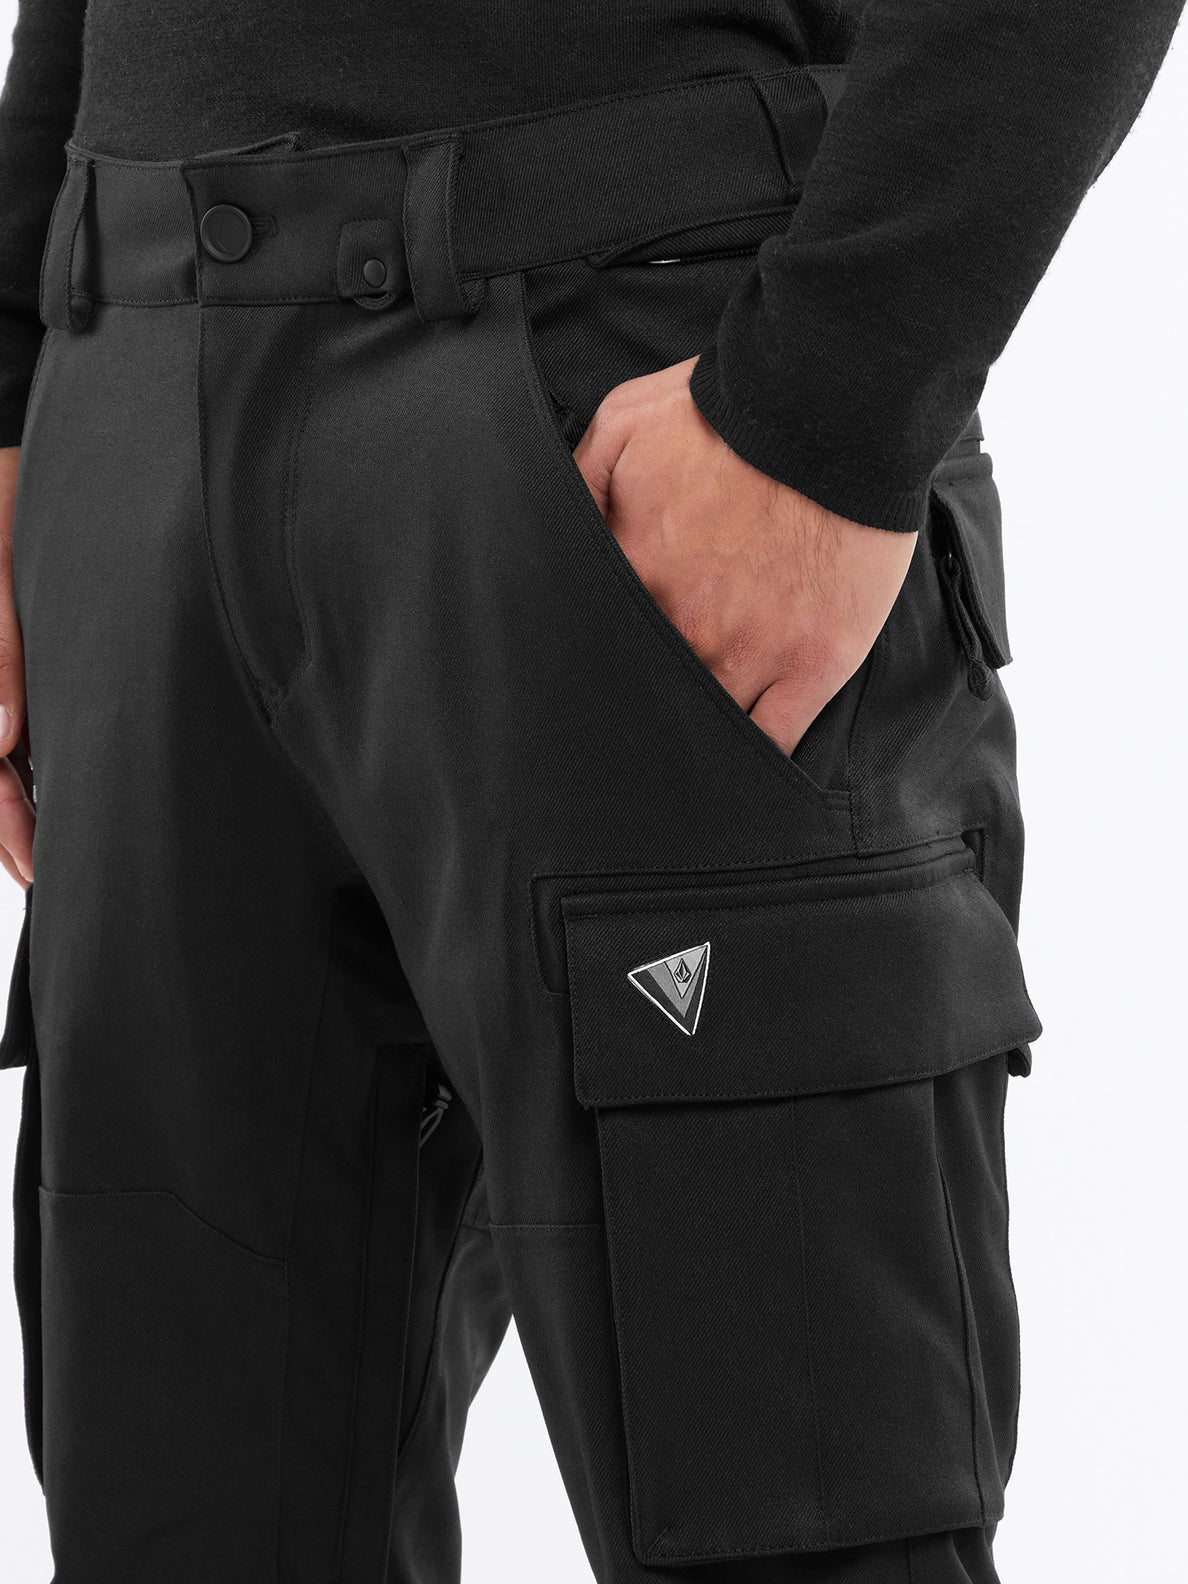 Mens New Articulated Pants - Black (G1352407_BLK) [30]